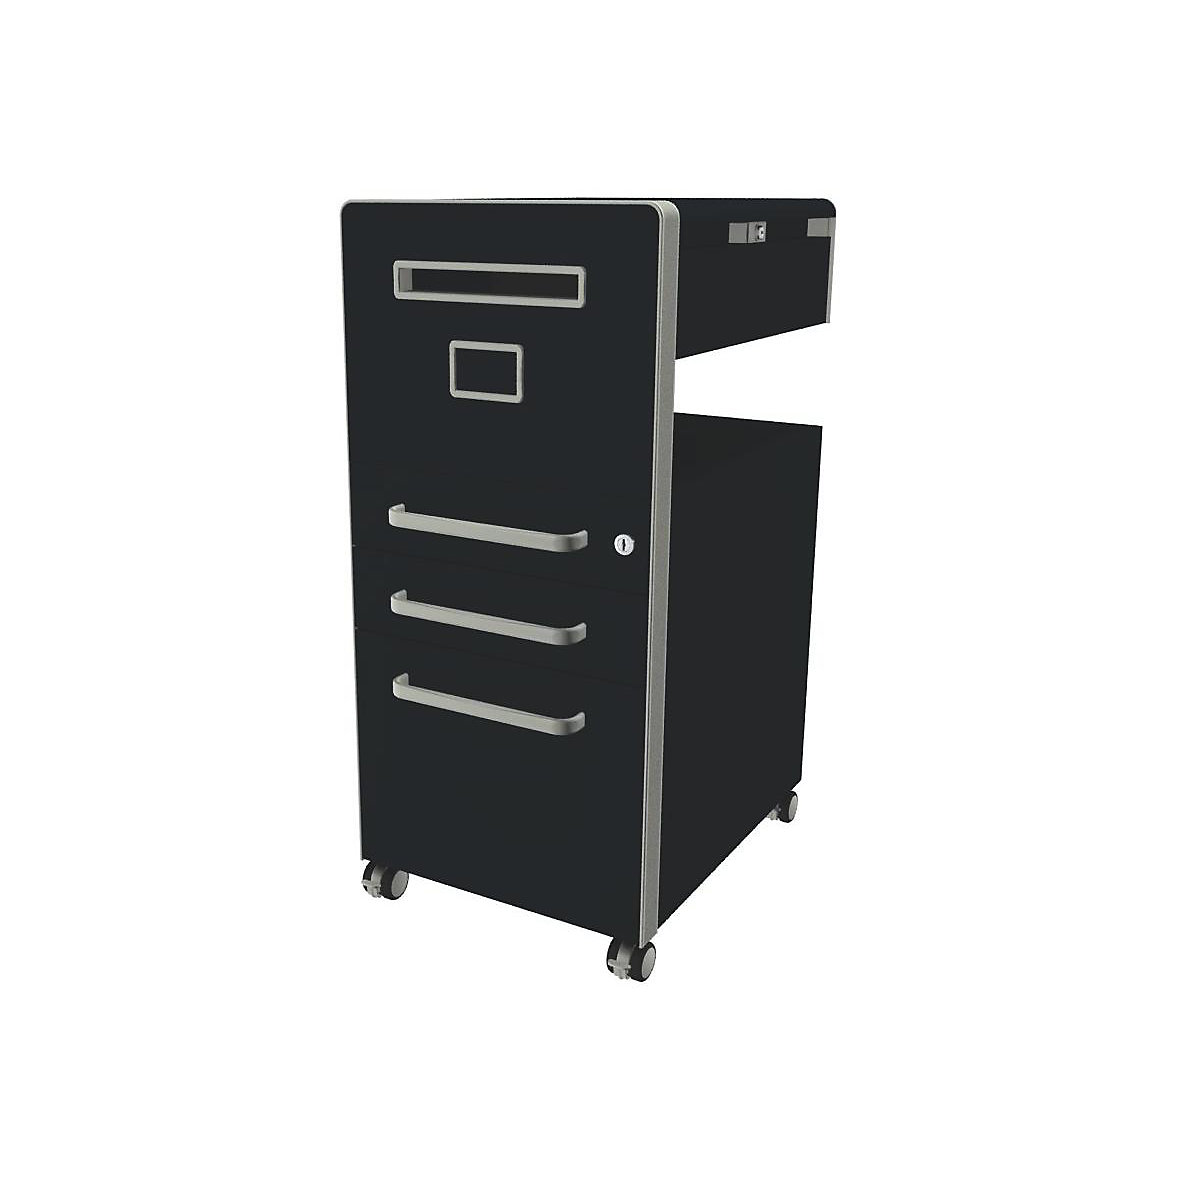 Bite™ pedestal furniture, with 1 whiteboard, opens on the left side – BISLEY, with 2 universal drawers, 1 suspension file drawer, prussian-24